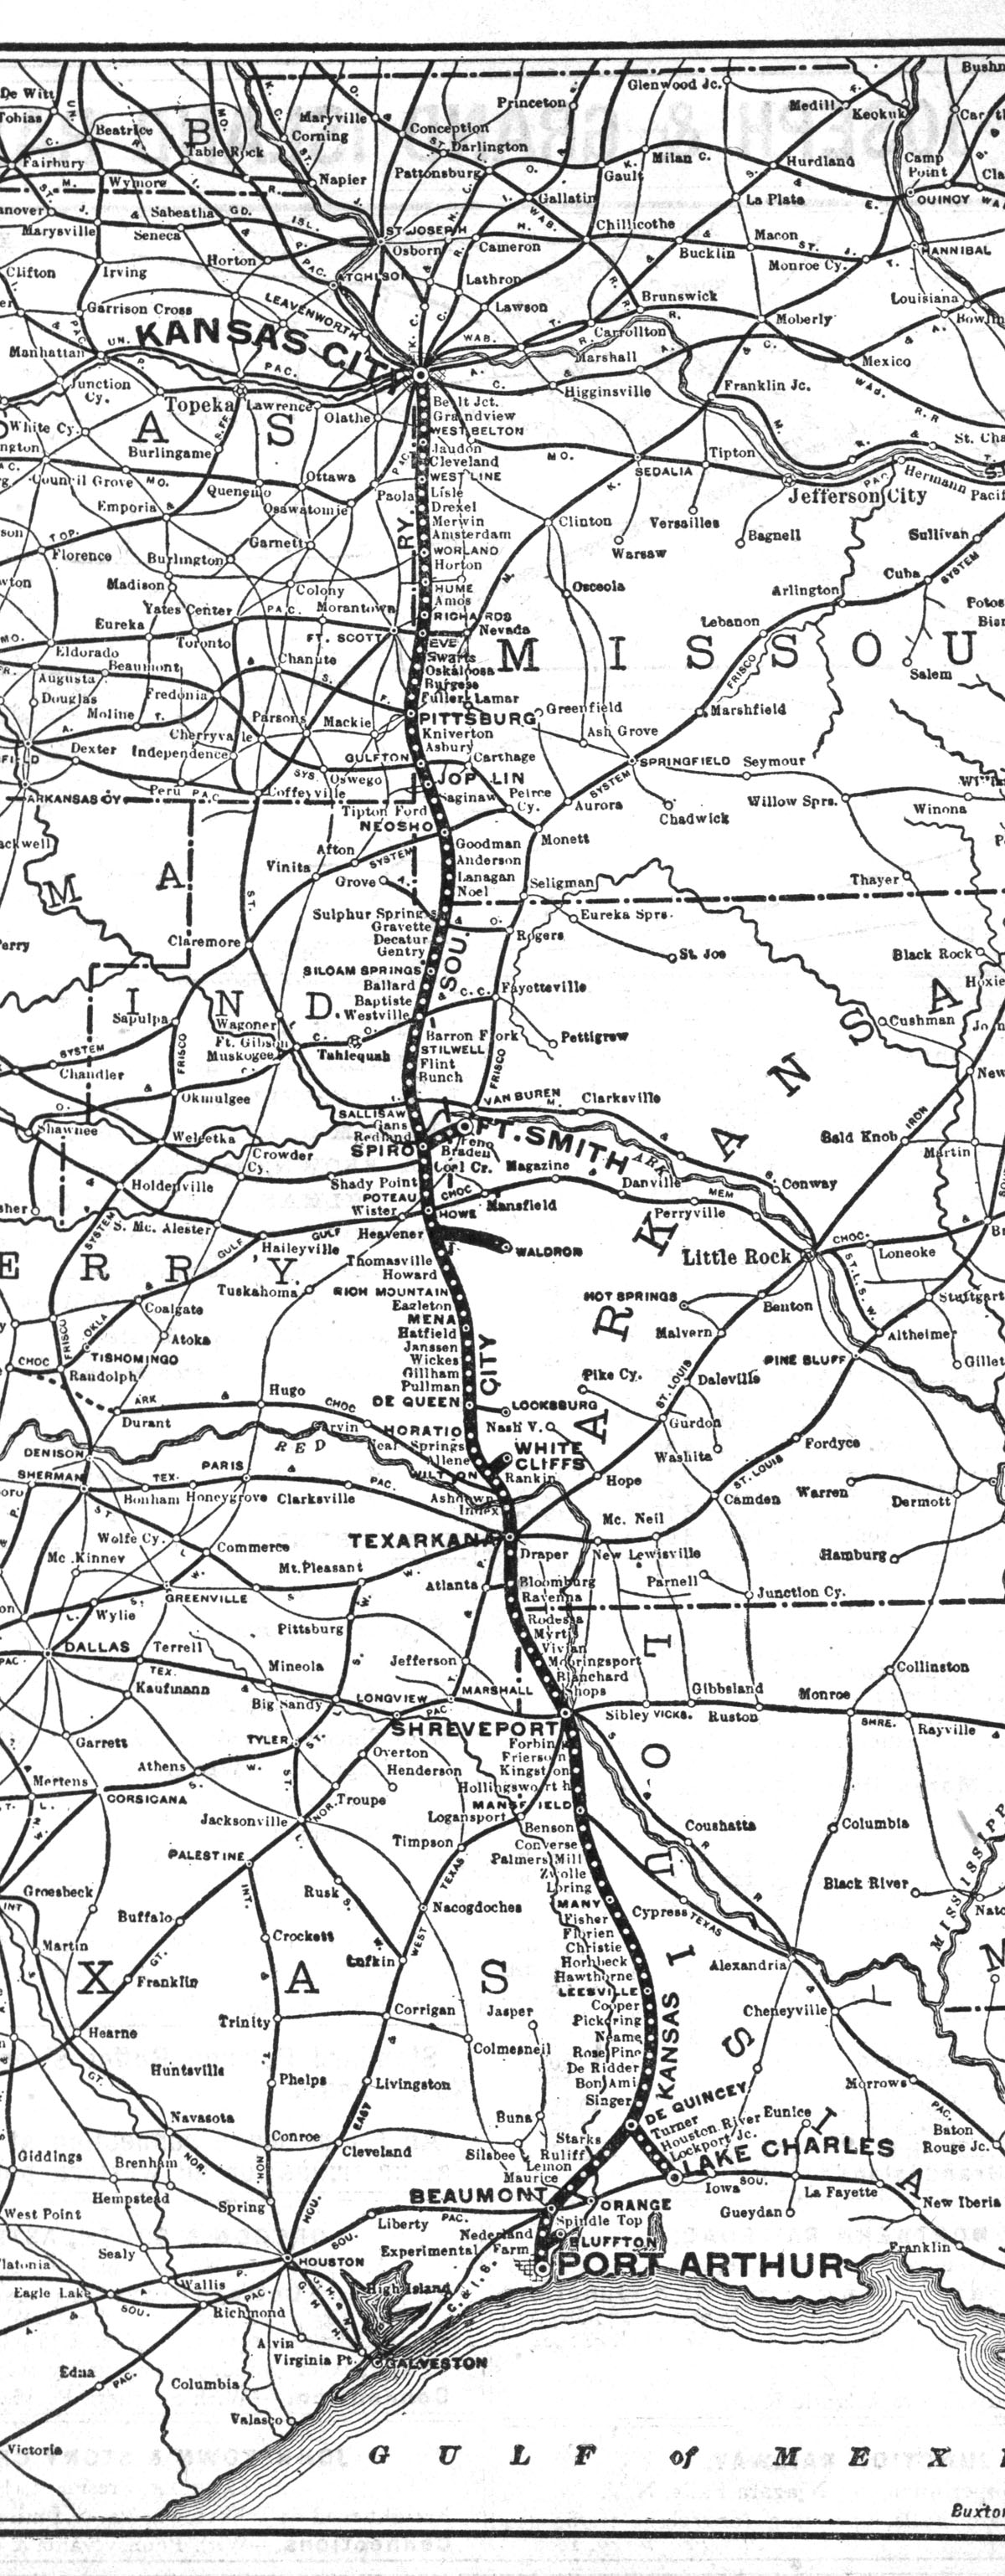 Kansas City Southern Railway Company (Mo., La., Ark., Tex.), Public Timetable and Map Showing Route in 1906.